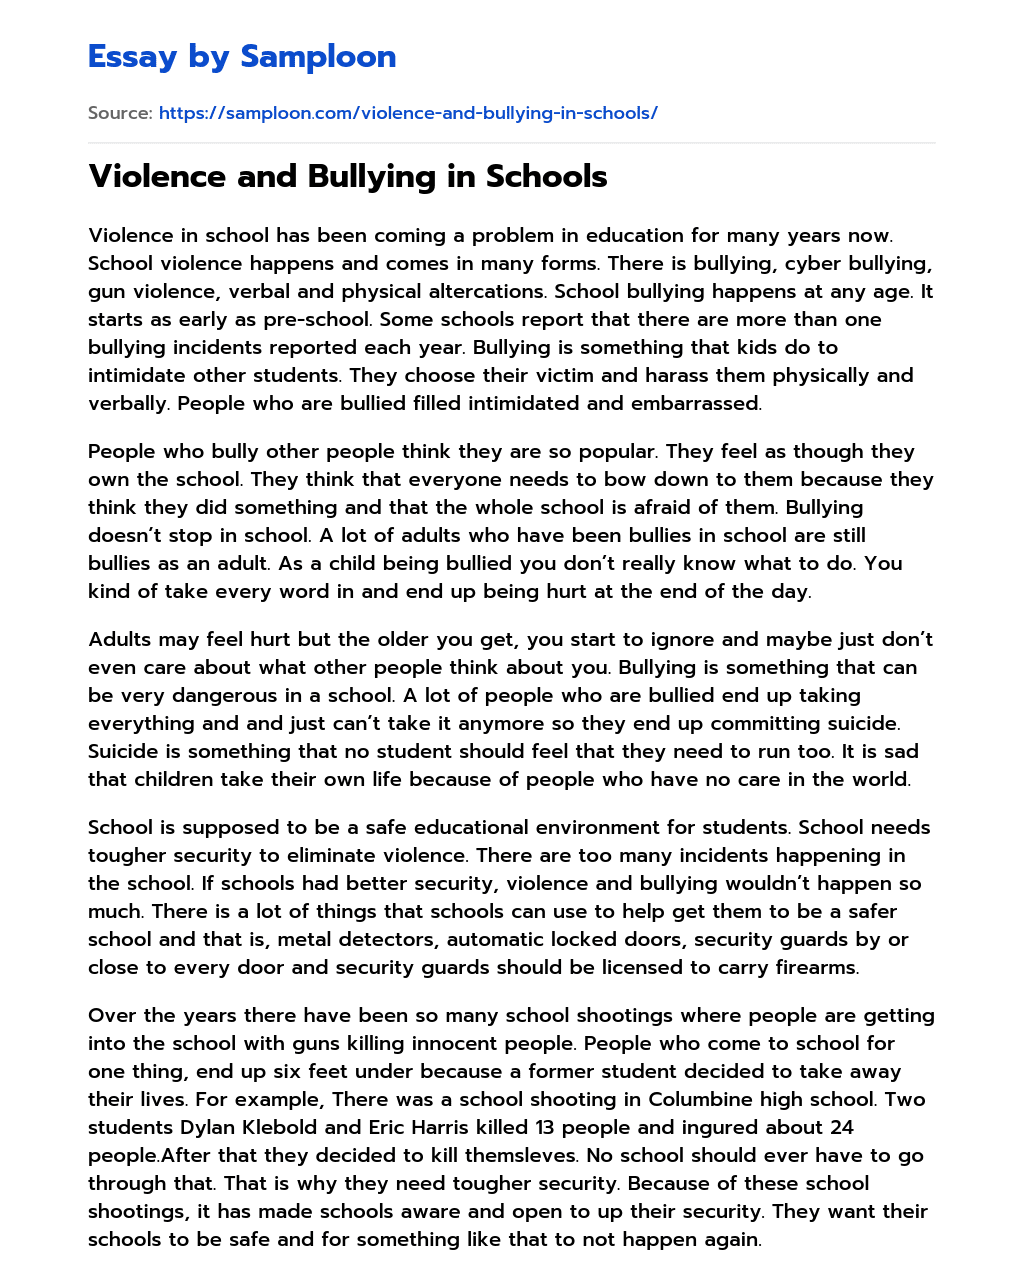 Violence and Bullying in Schools essay